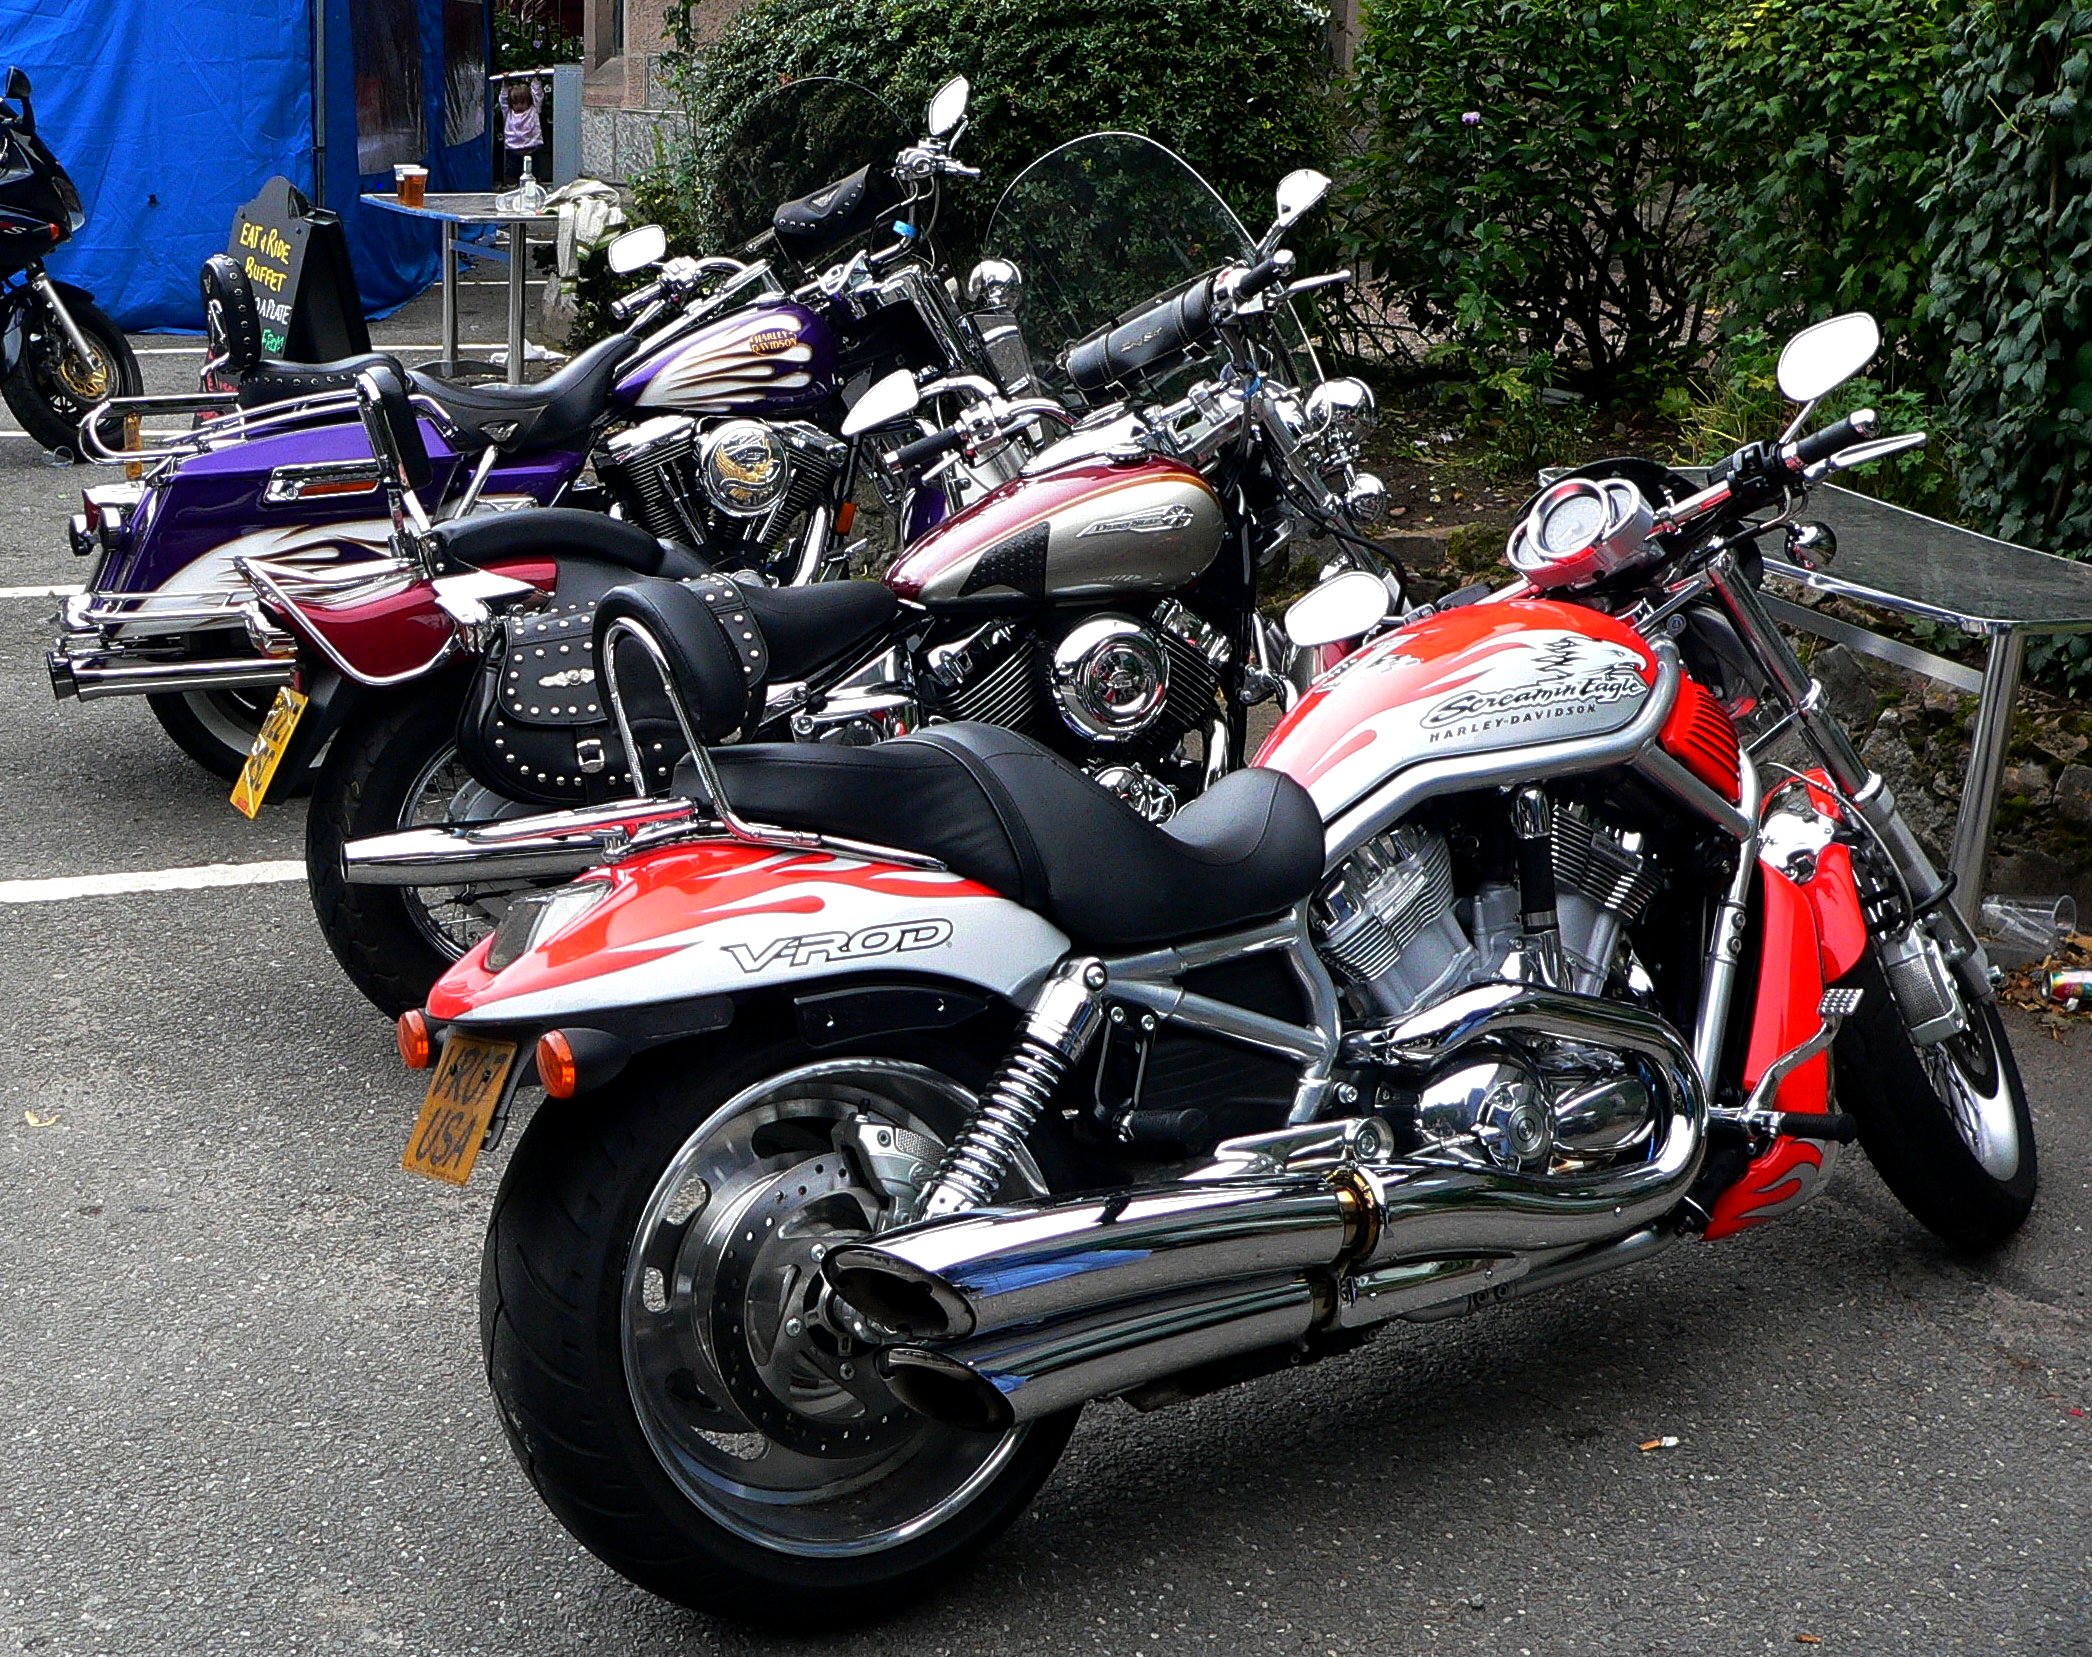 many motorcycles parked in rows next to each other